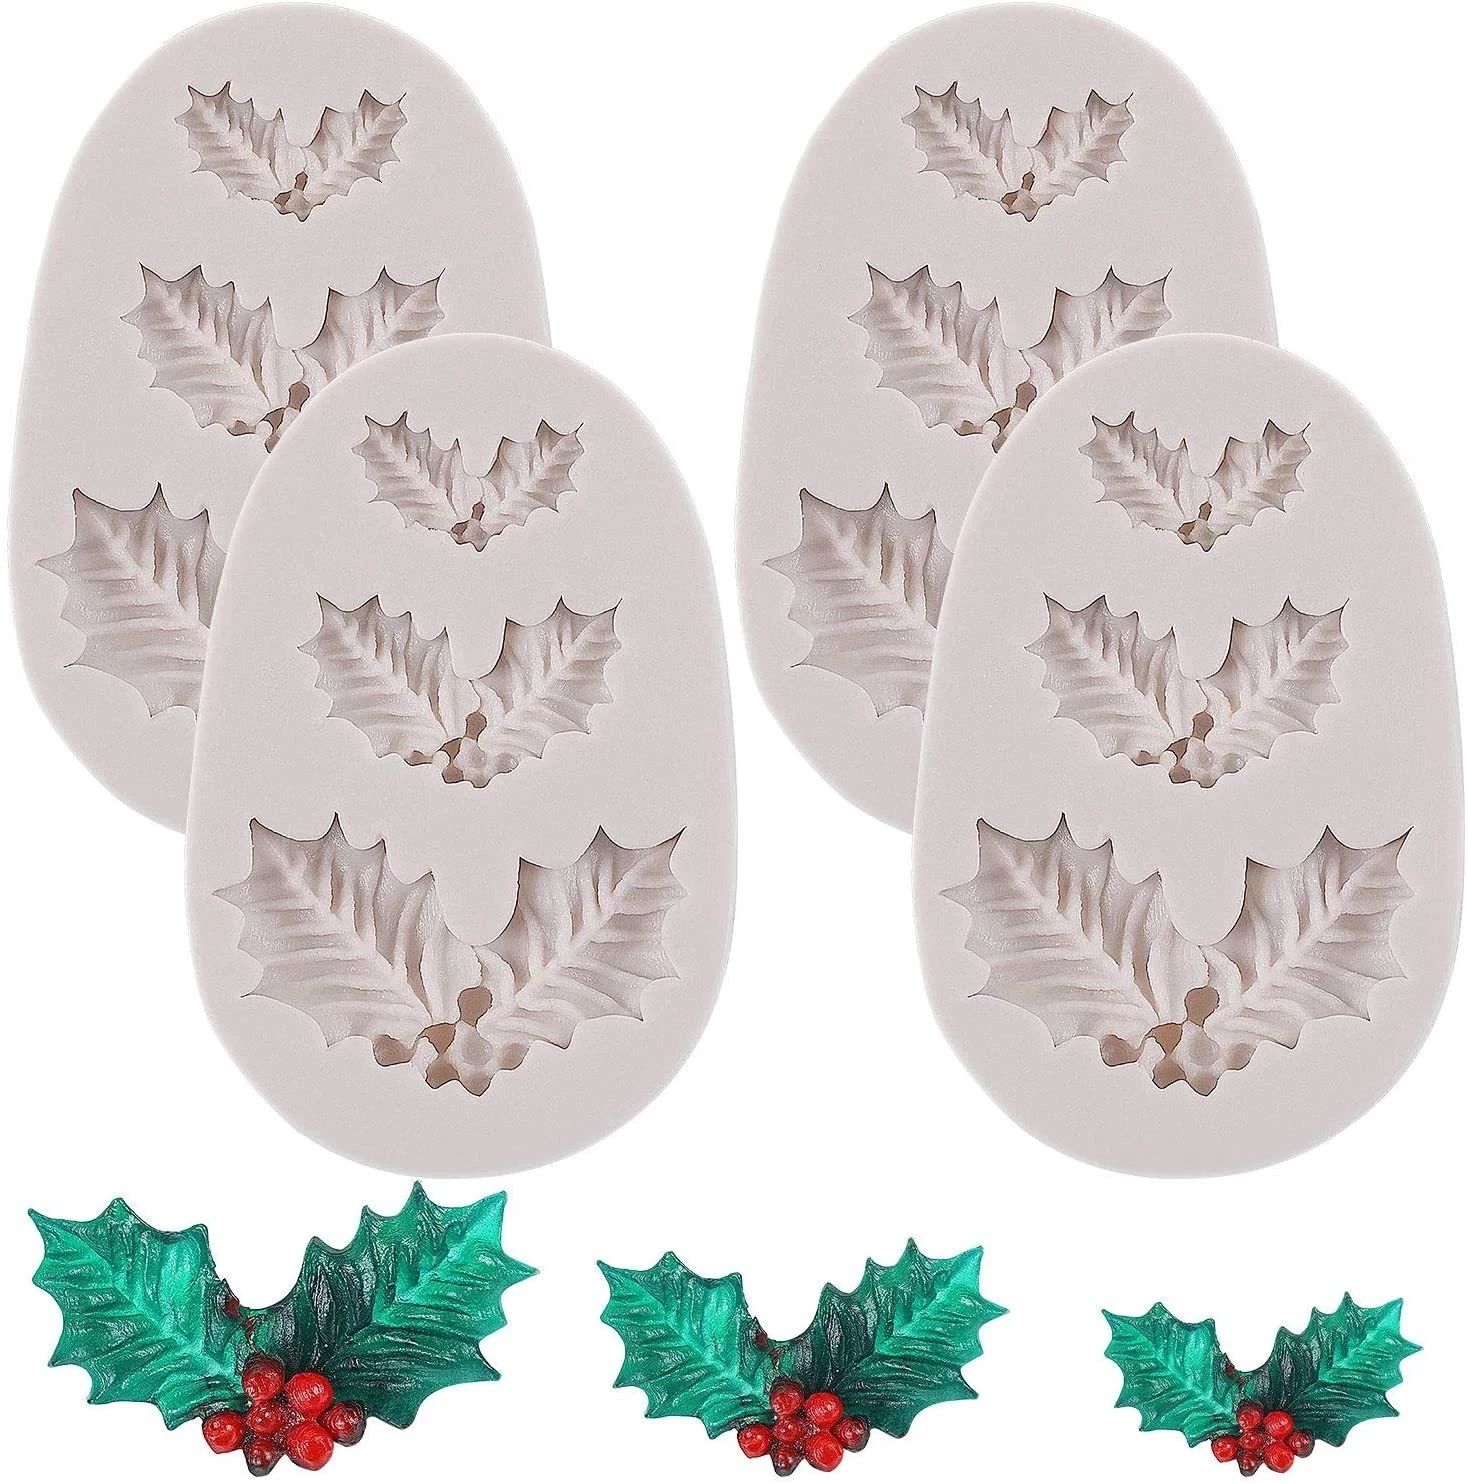 

Christmas Holly Leaf Shape Silicone Mold Fondant Cake Cookie Decor Tools Chocolate Cupcake Cookies Baking Safety Silicone Mold